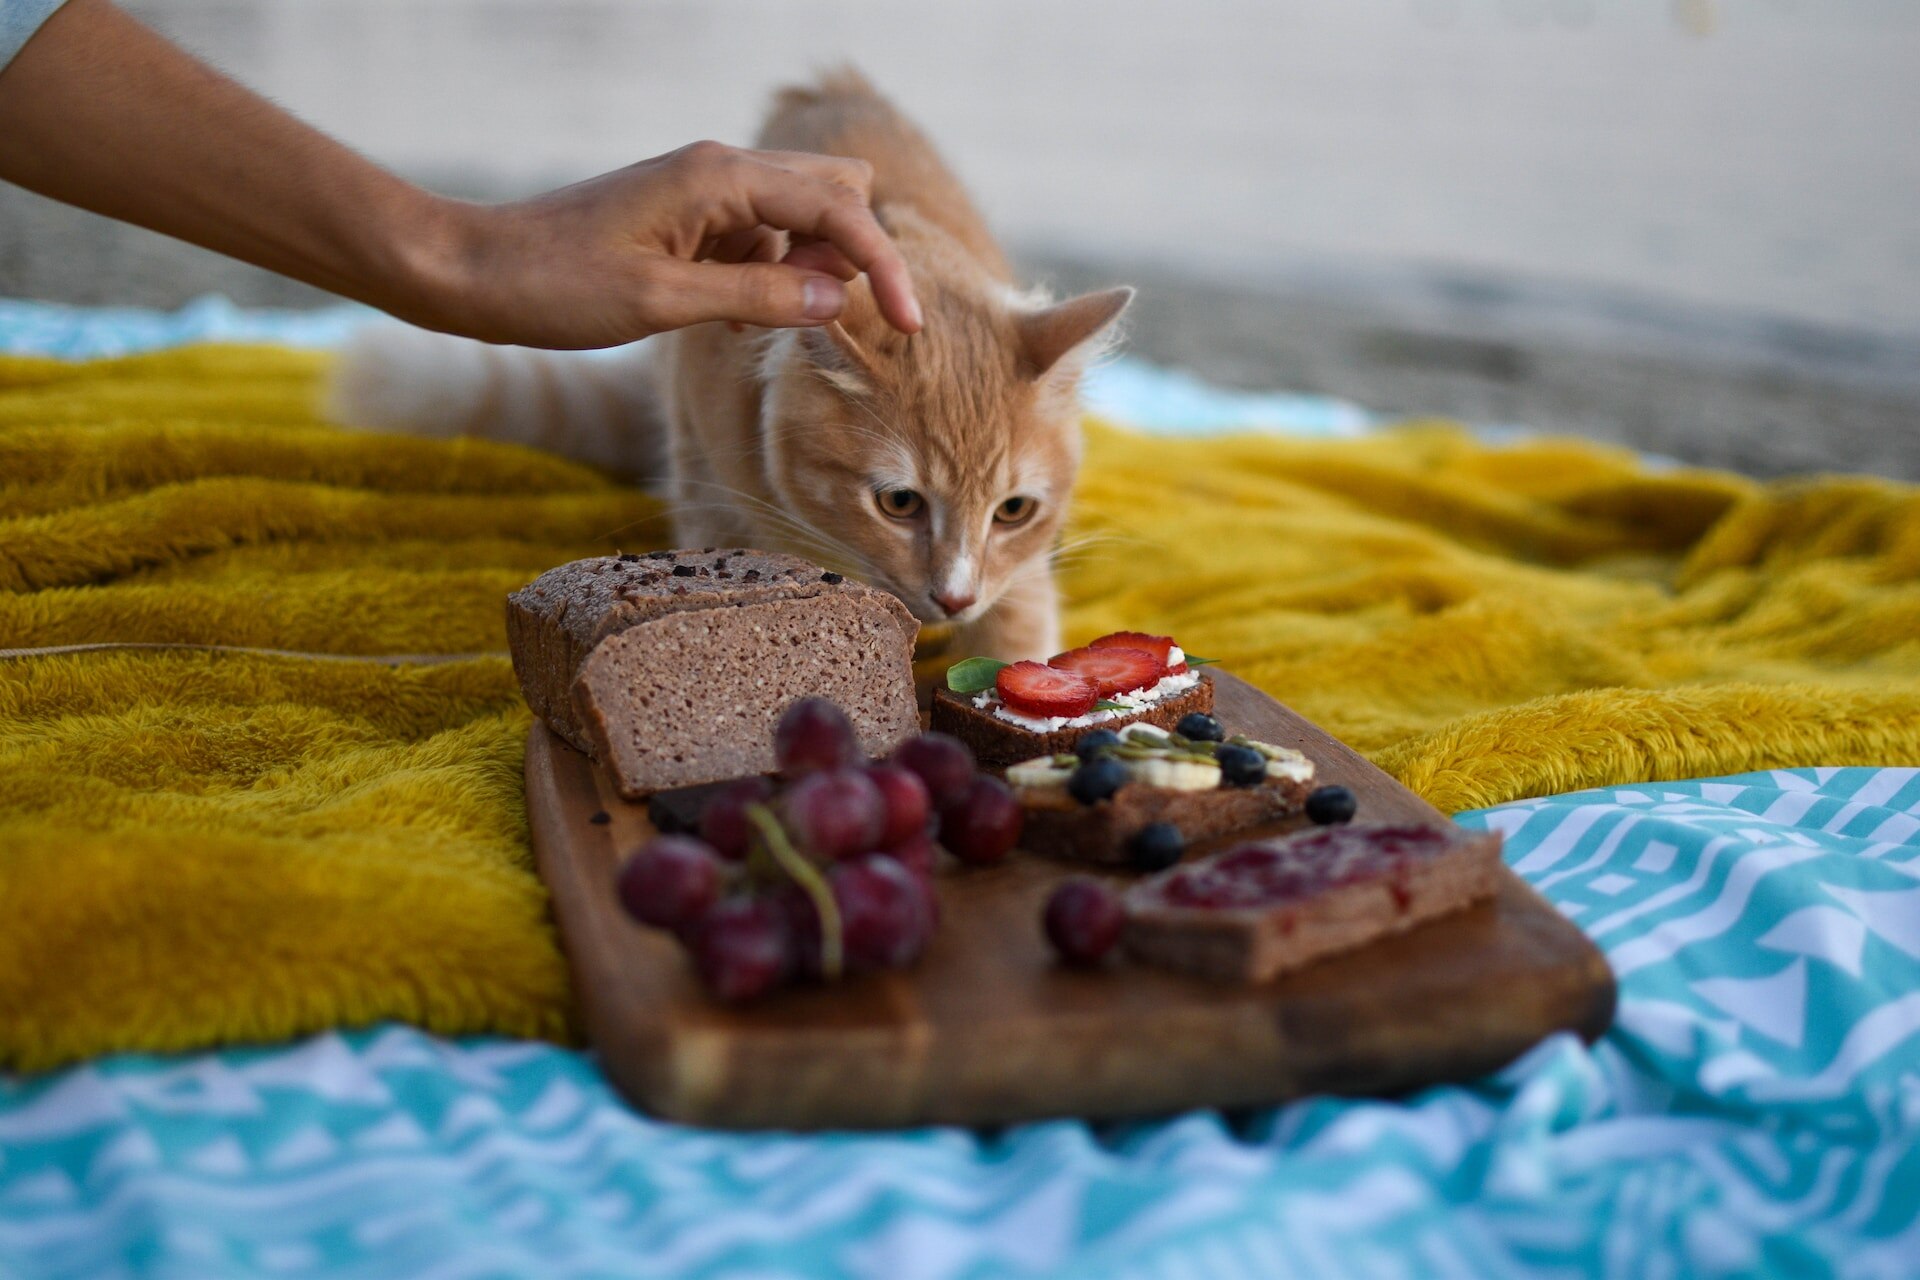 A cat sniffing a tray of breakfast sandwiches on a bed